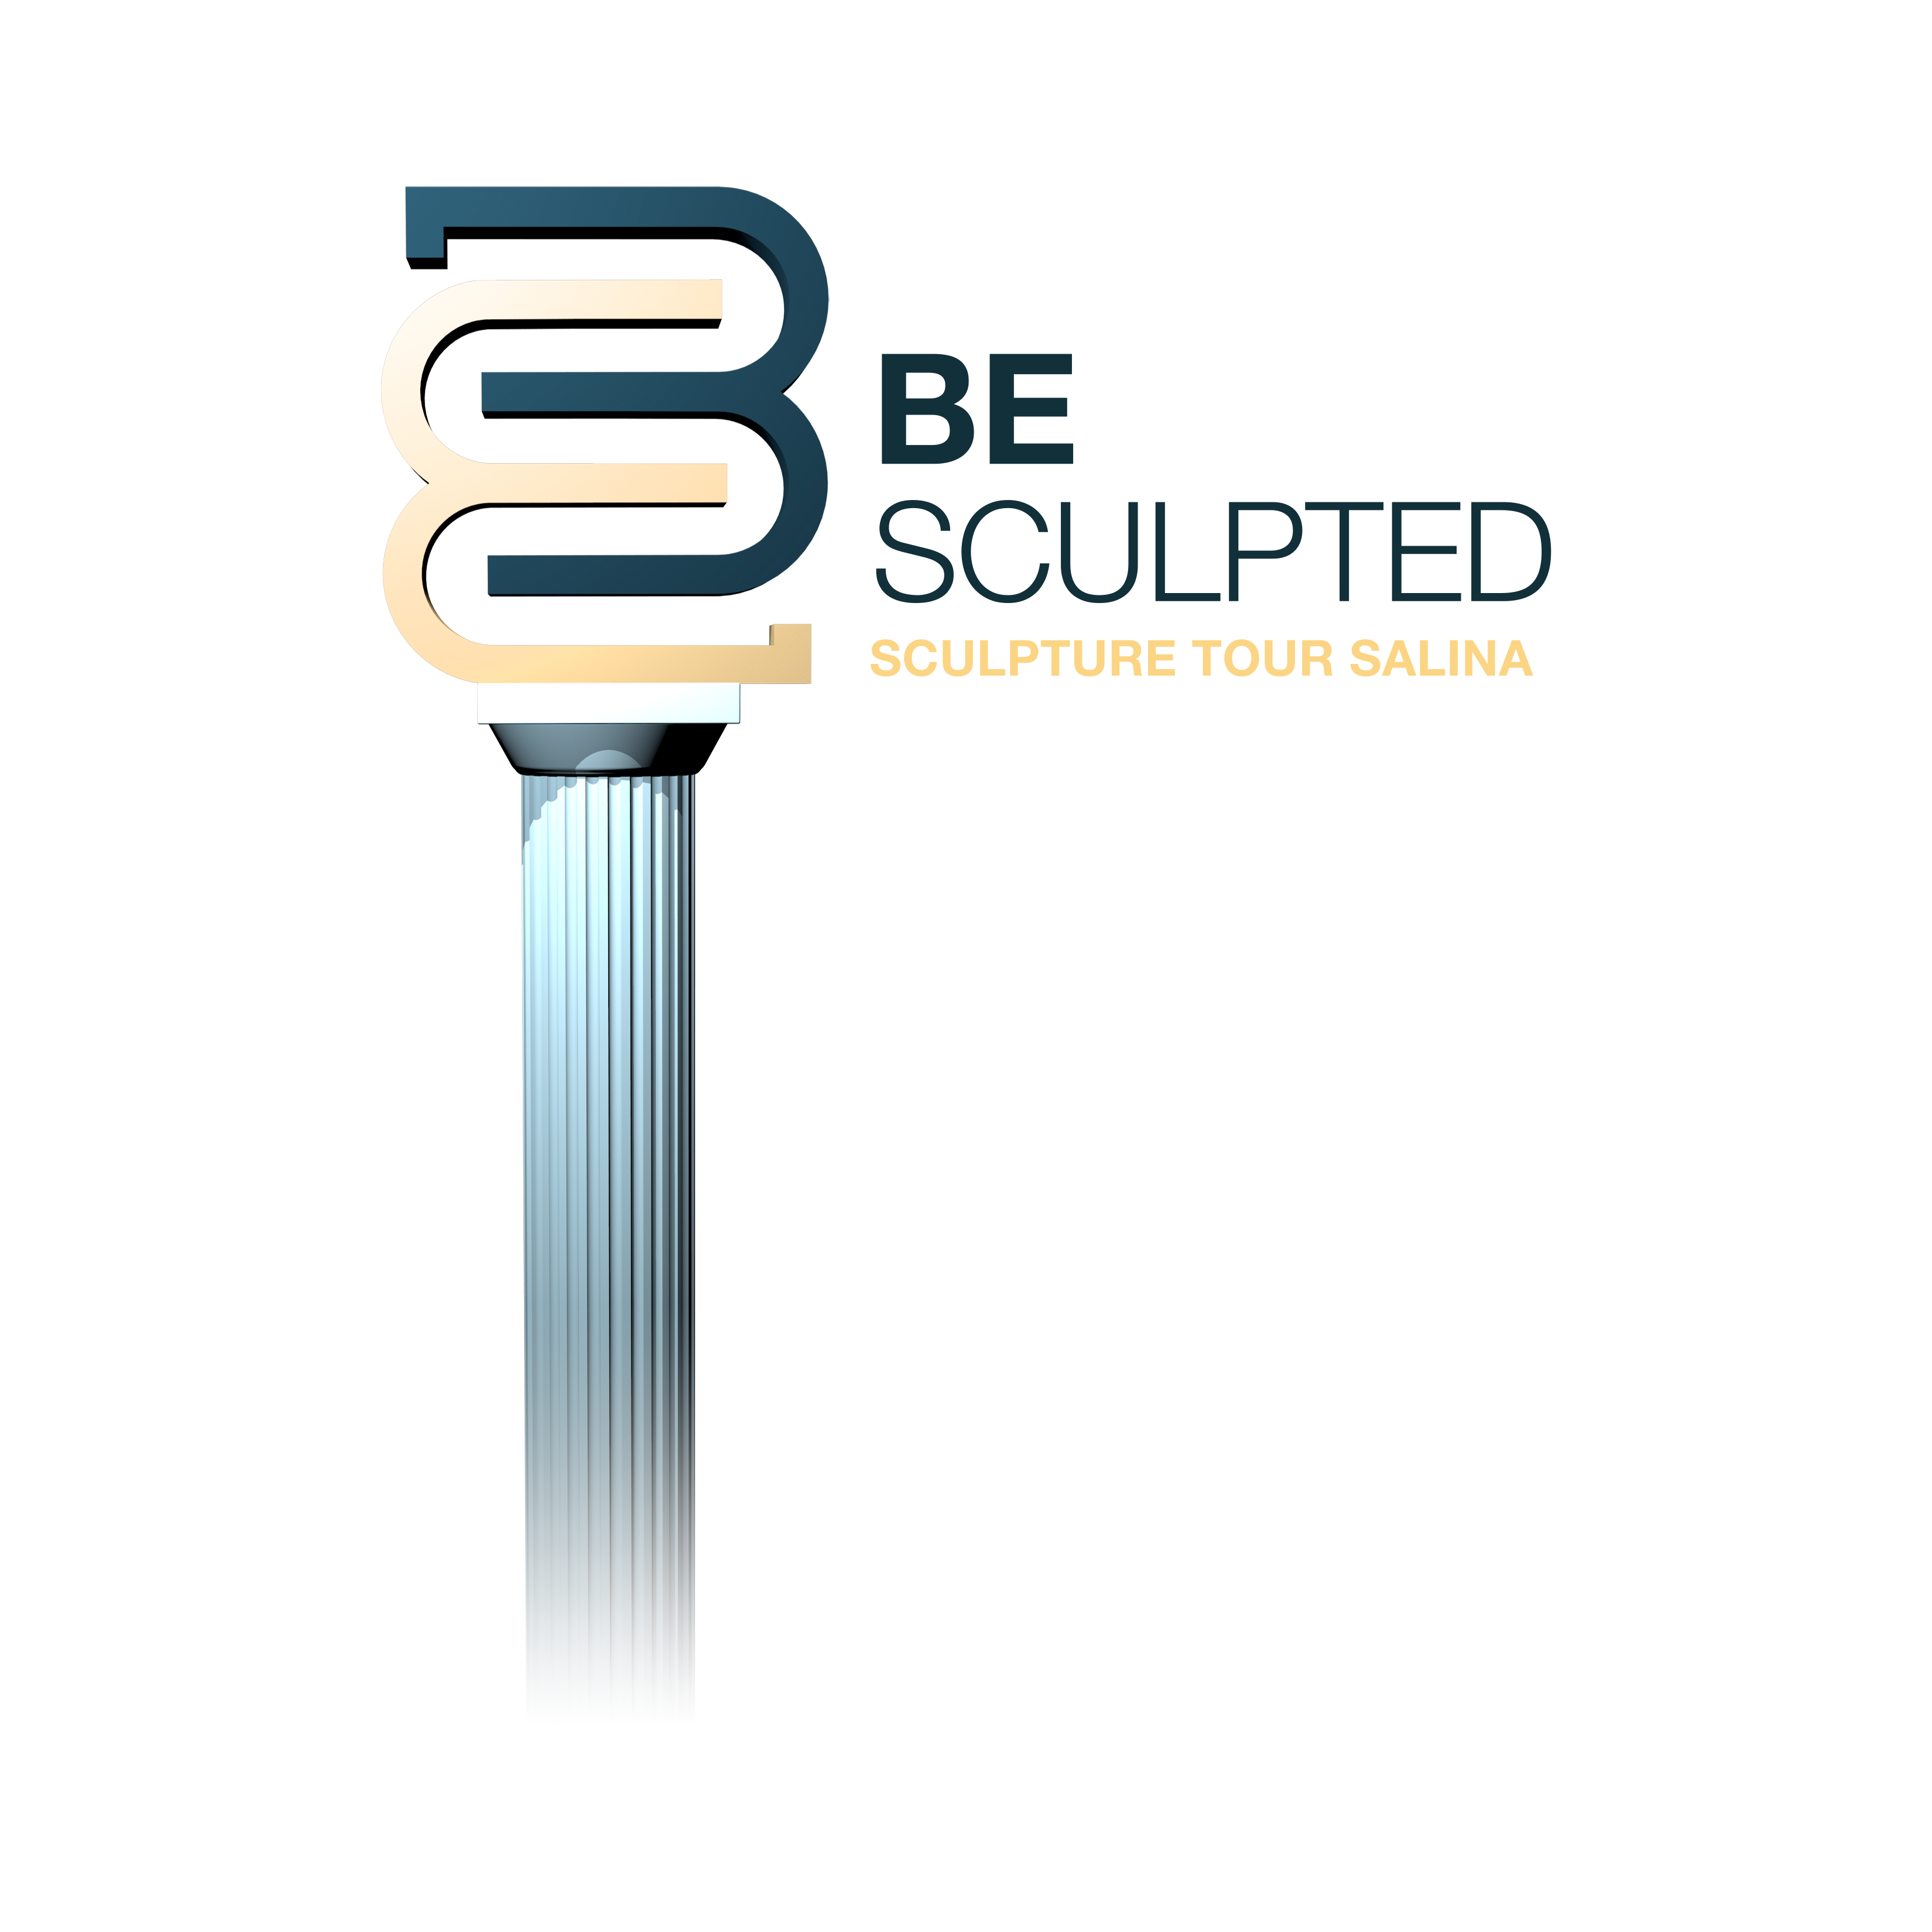 BE Sculpted graphic